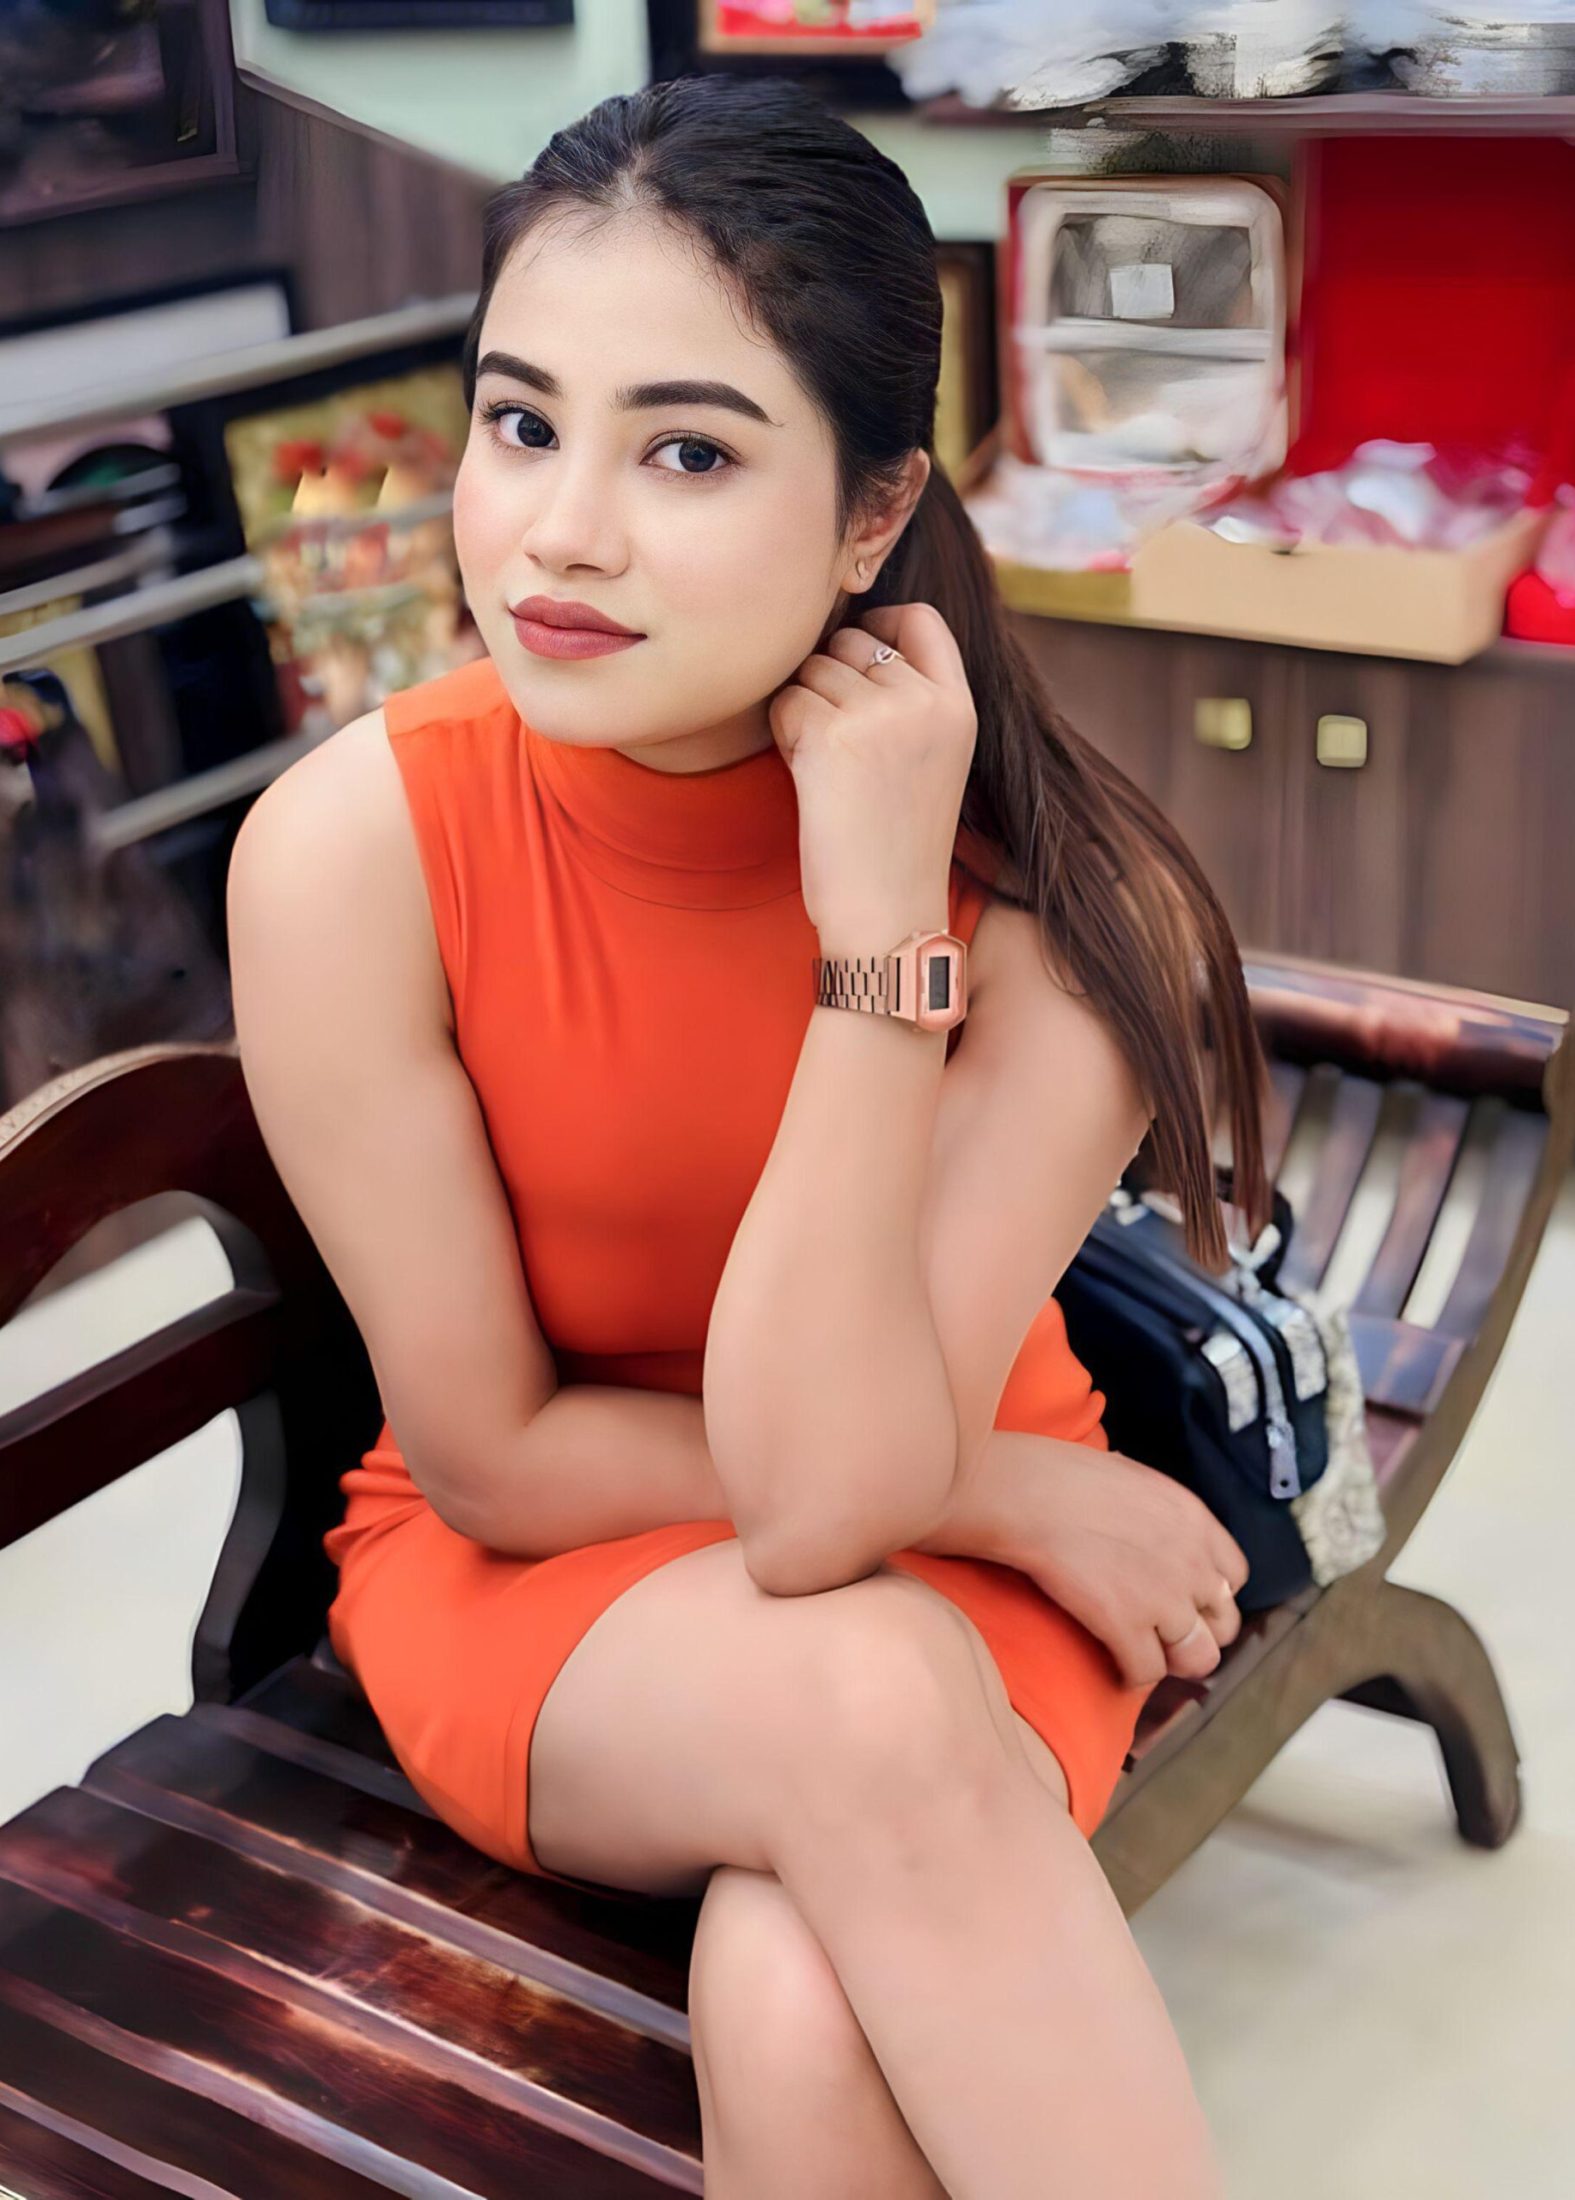 Meet Irresistible Pune Call Girls for Companionship